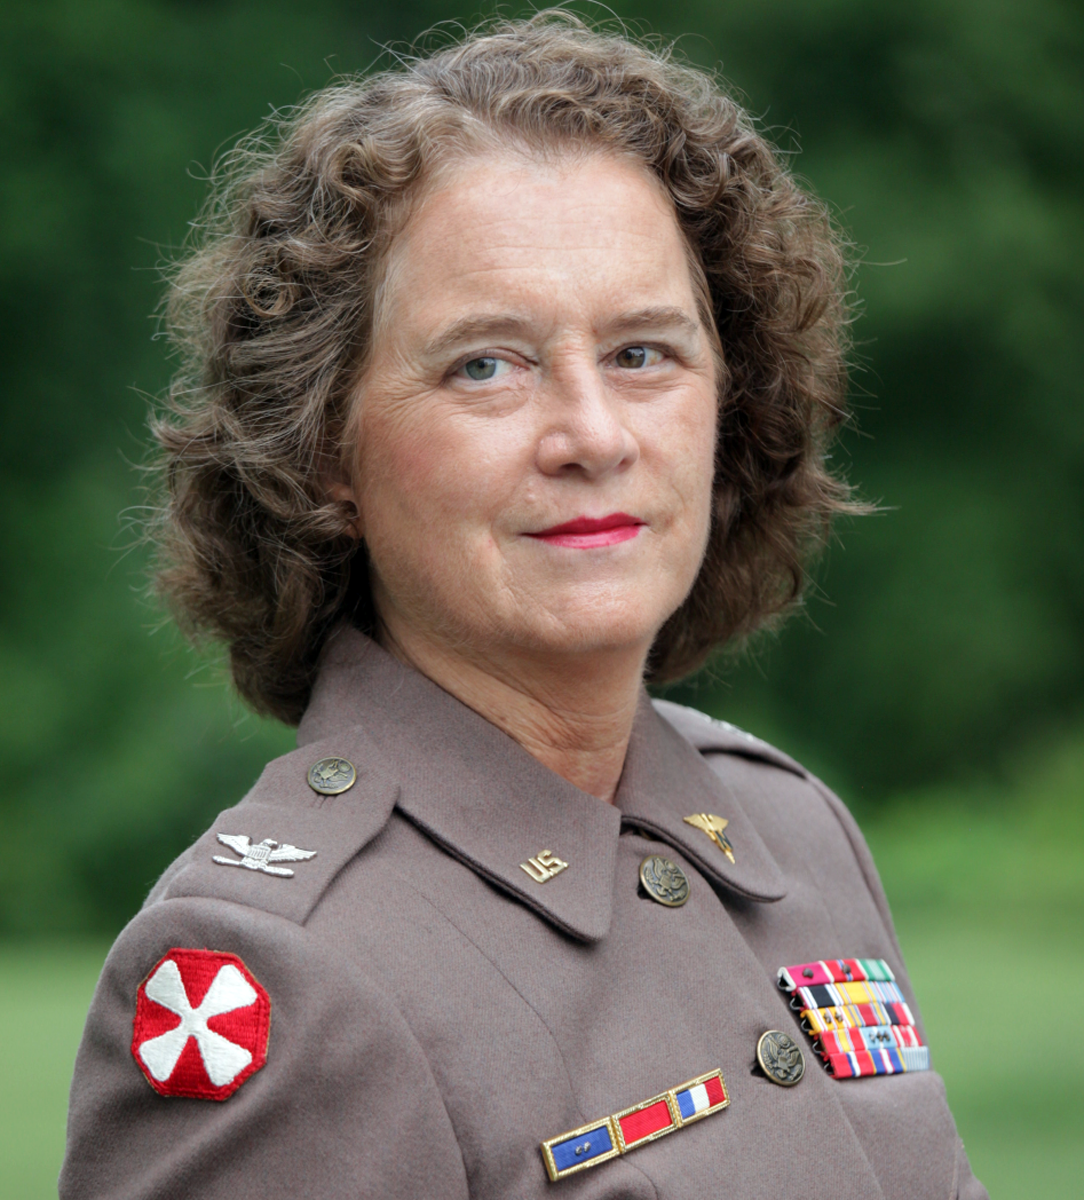 Becky Park as Col. Ruby Bradley, with brownish-red hair wearing dress nurse's Army uniform from the Korean War era